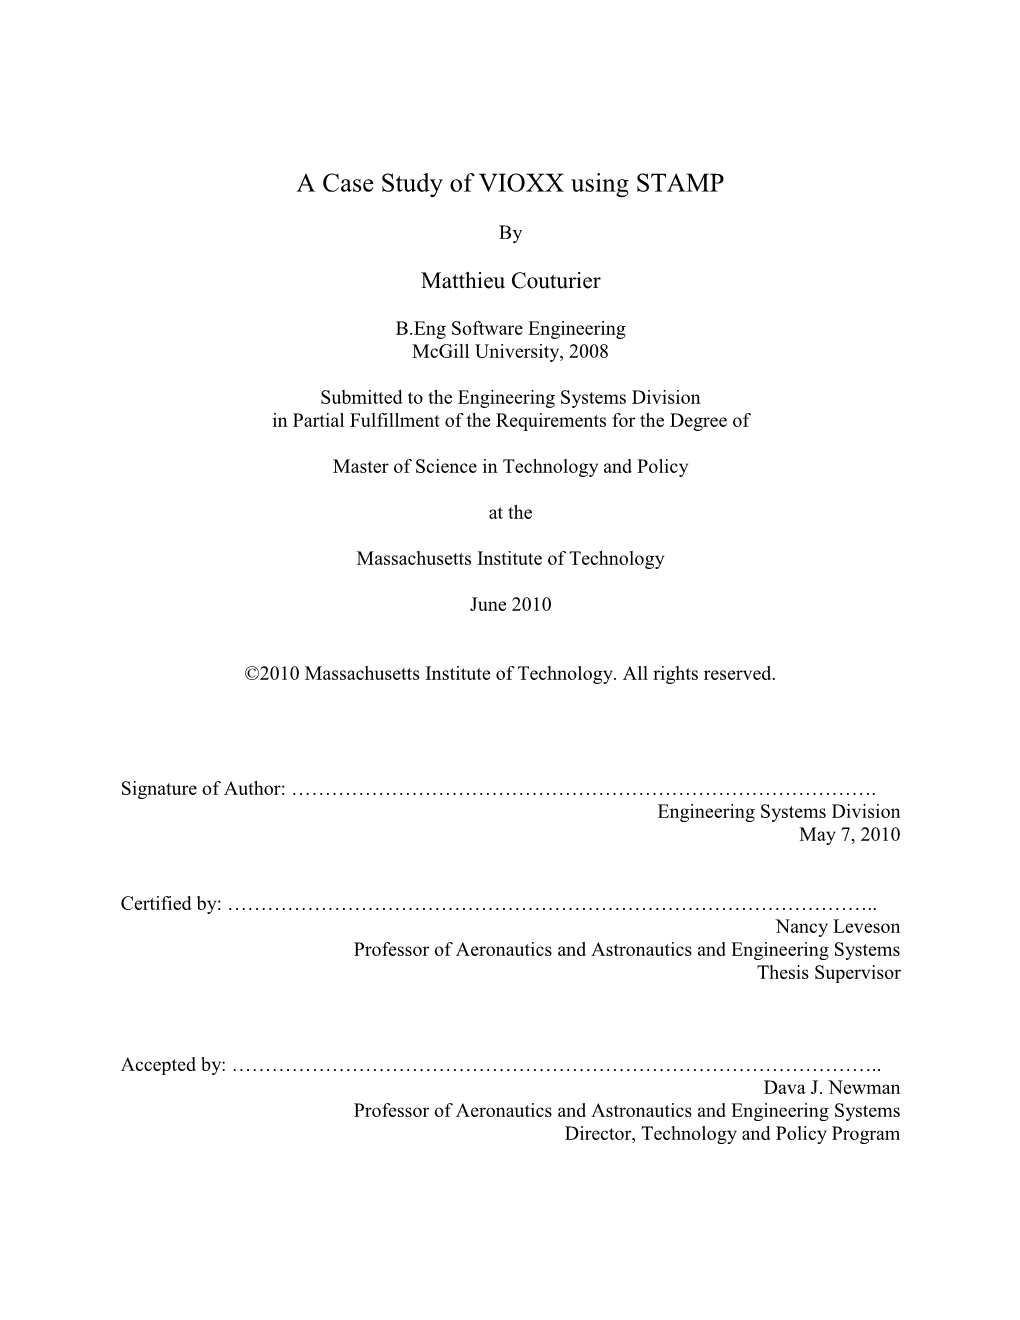 A Case Study of VIOXX Using STAMP